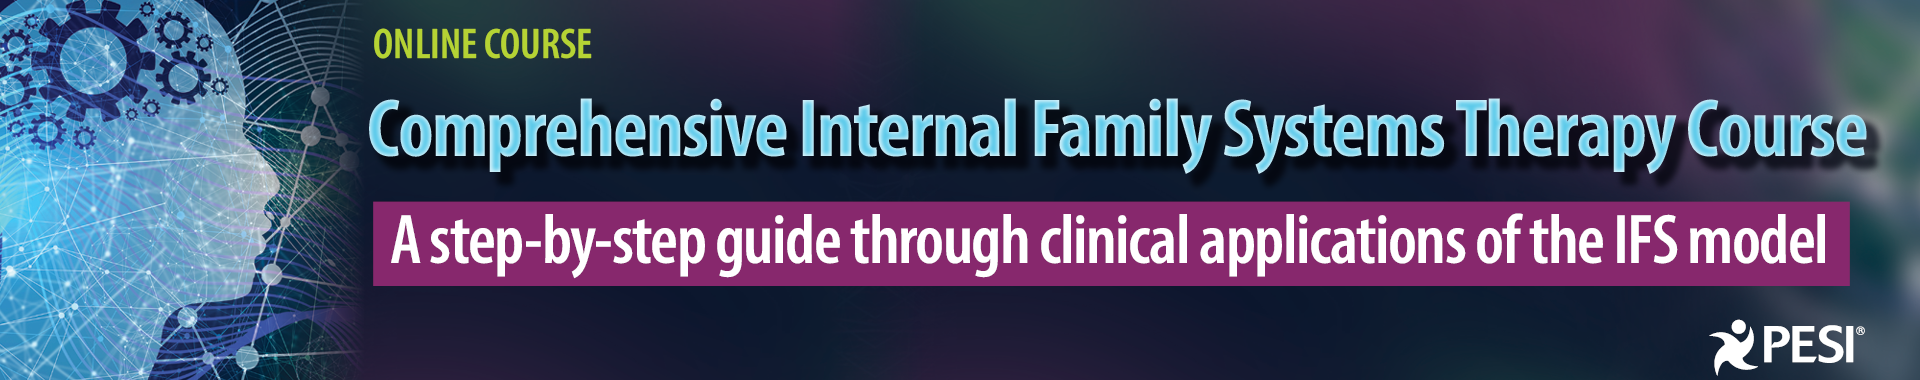 Comprehensive Internal Family Systems Therapy Course: A Step-by-Step Guide Through Clinical Applications of the IFS Model